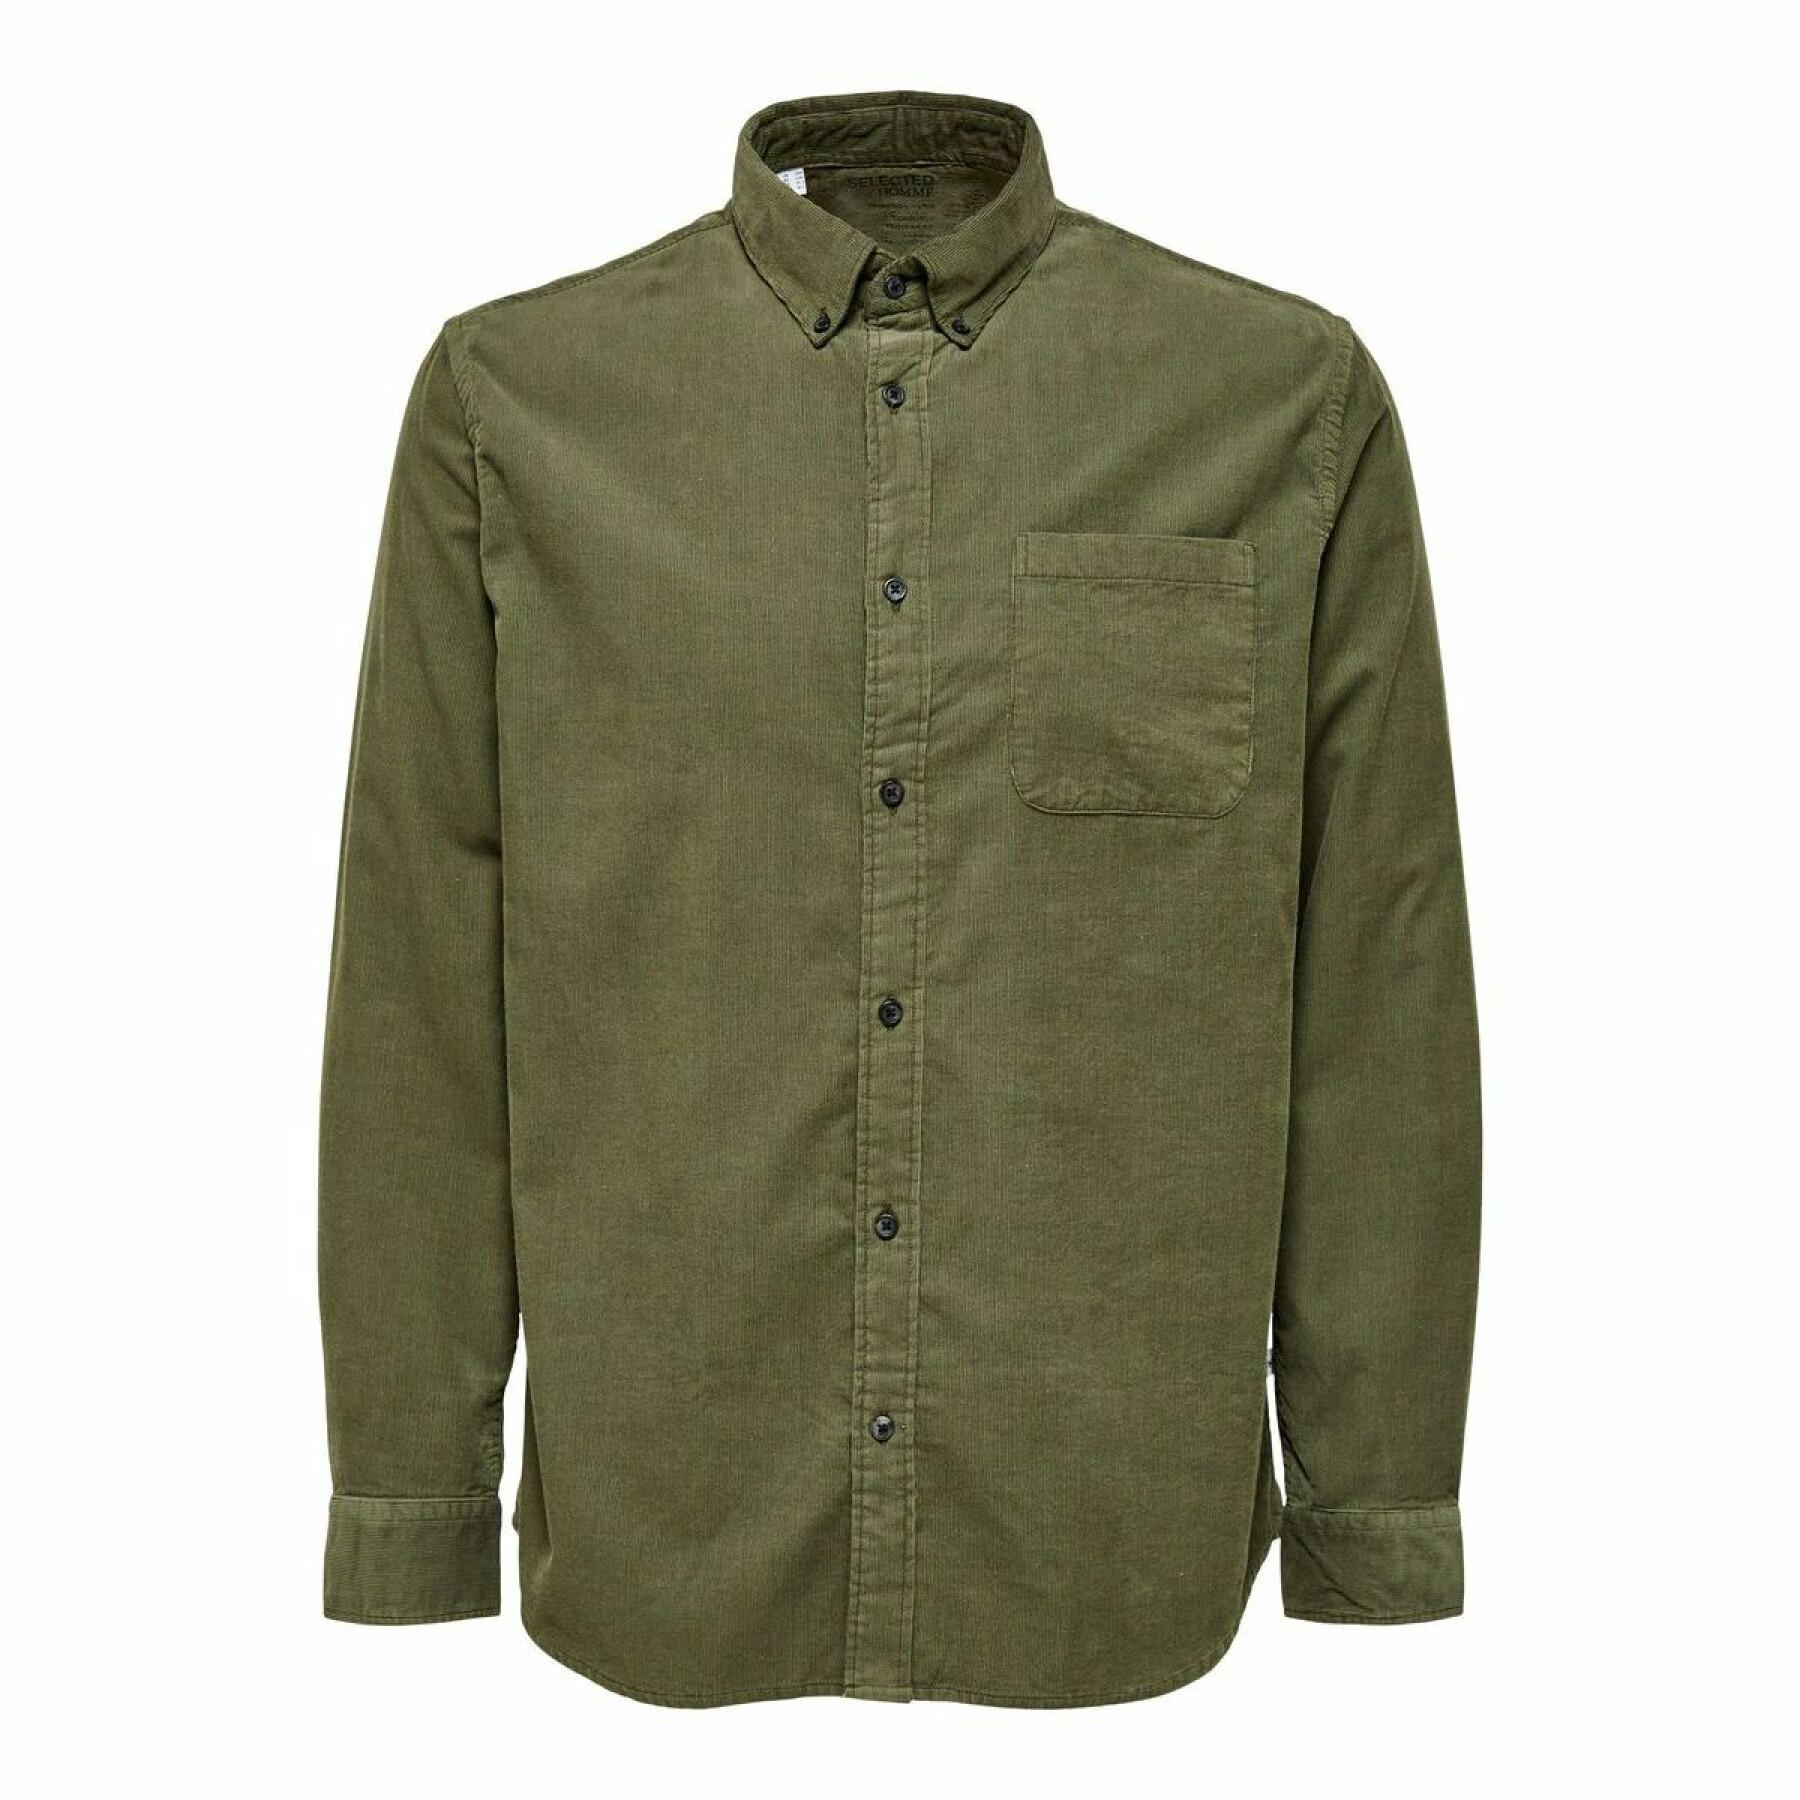 Chemise Selected Regrick-Cord